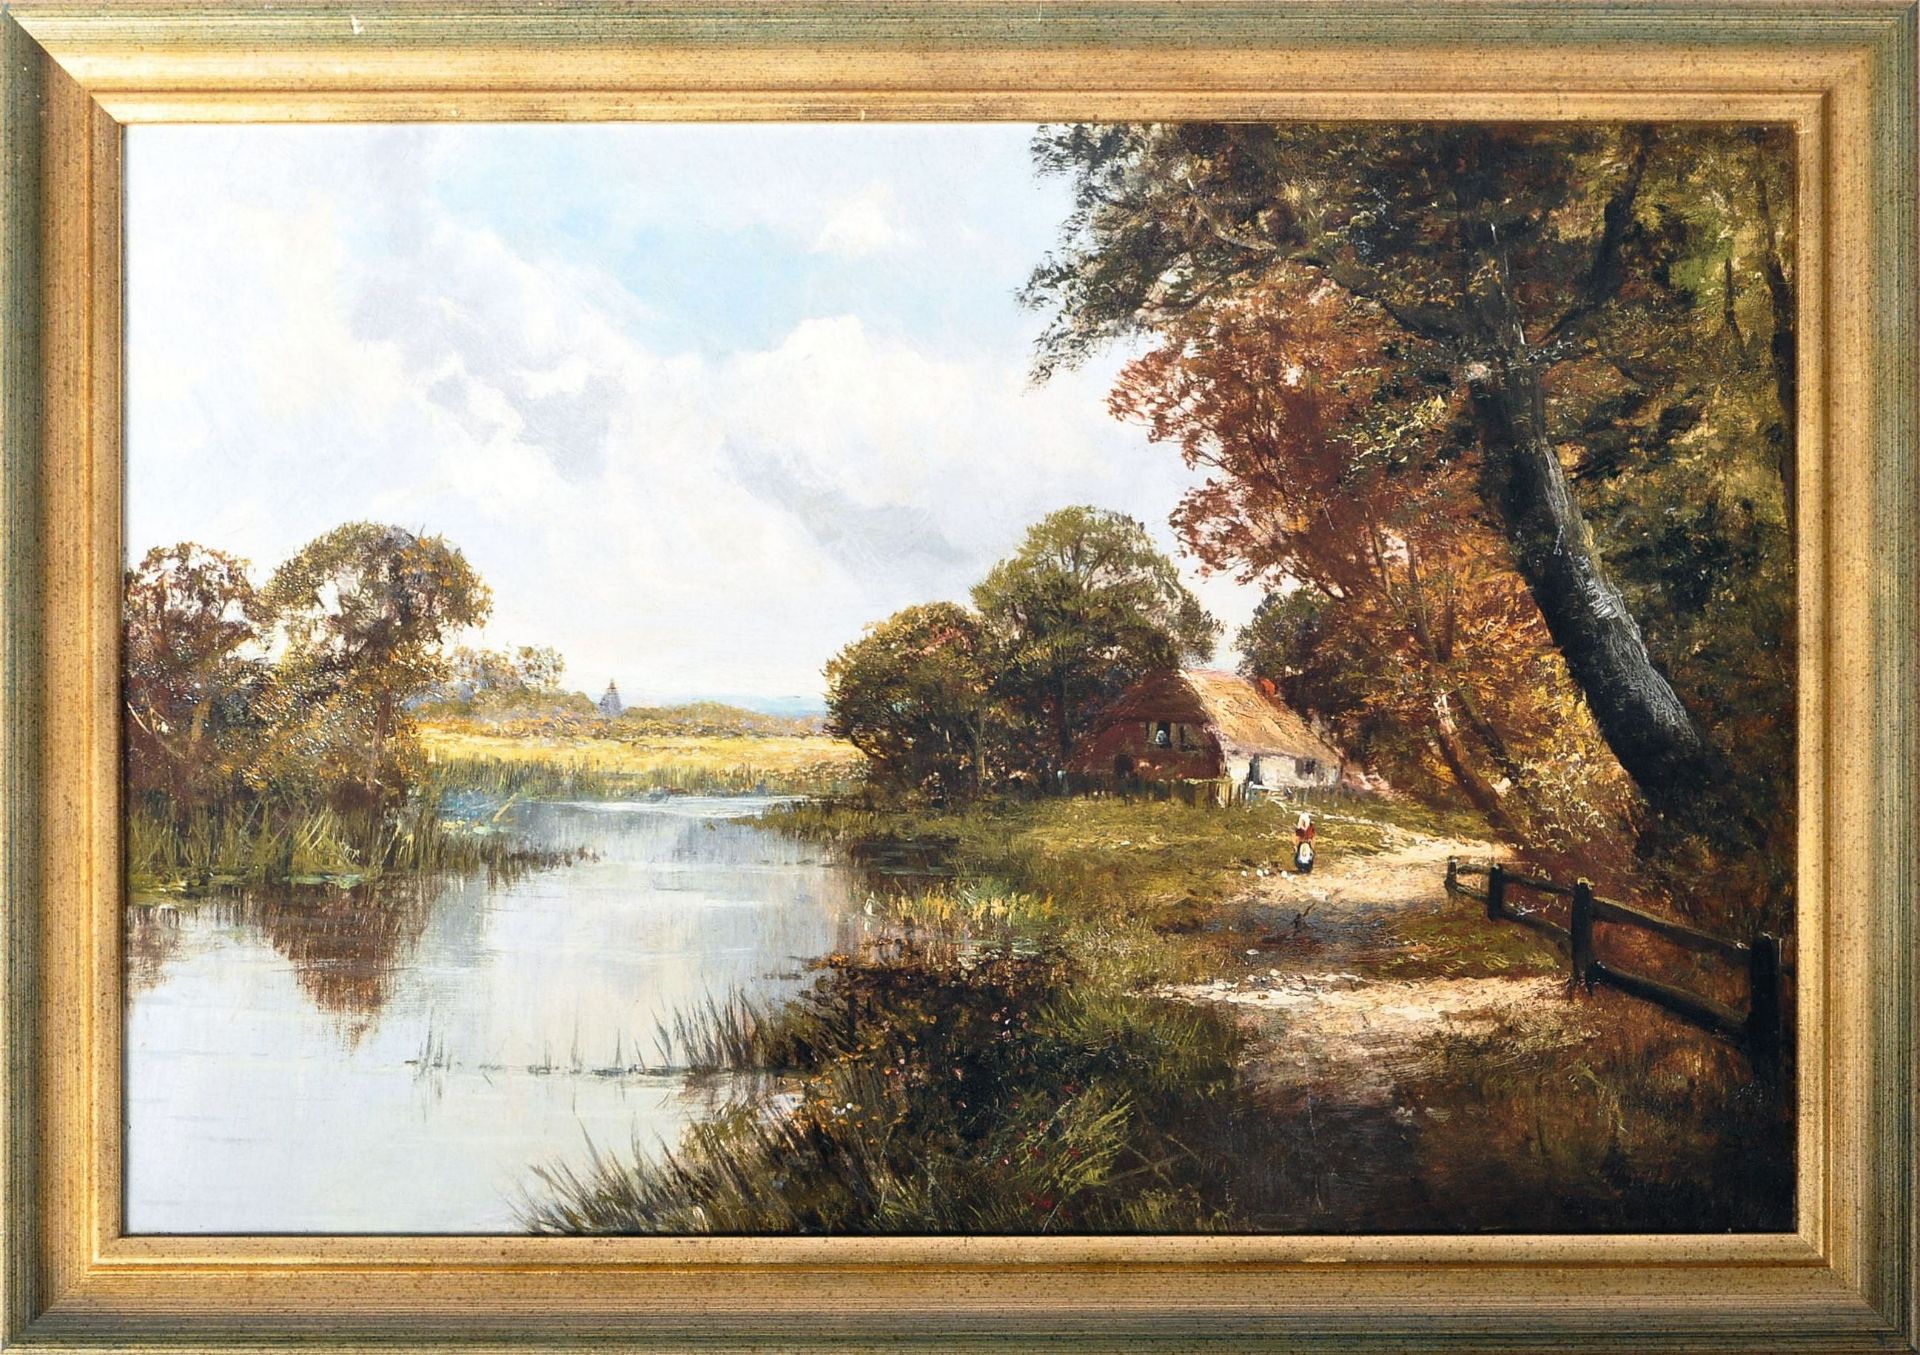 HENRY COOPER 'NEAR THAMES DITTON' OIL ON CANVAS PAINTING